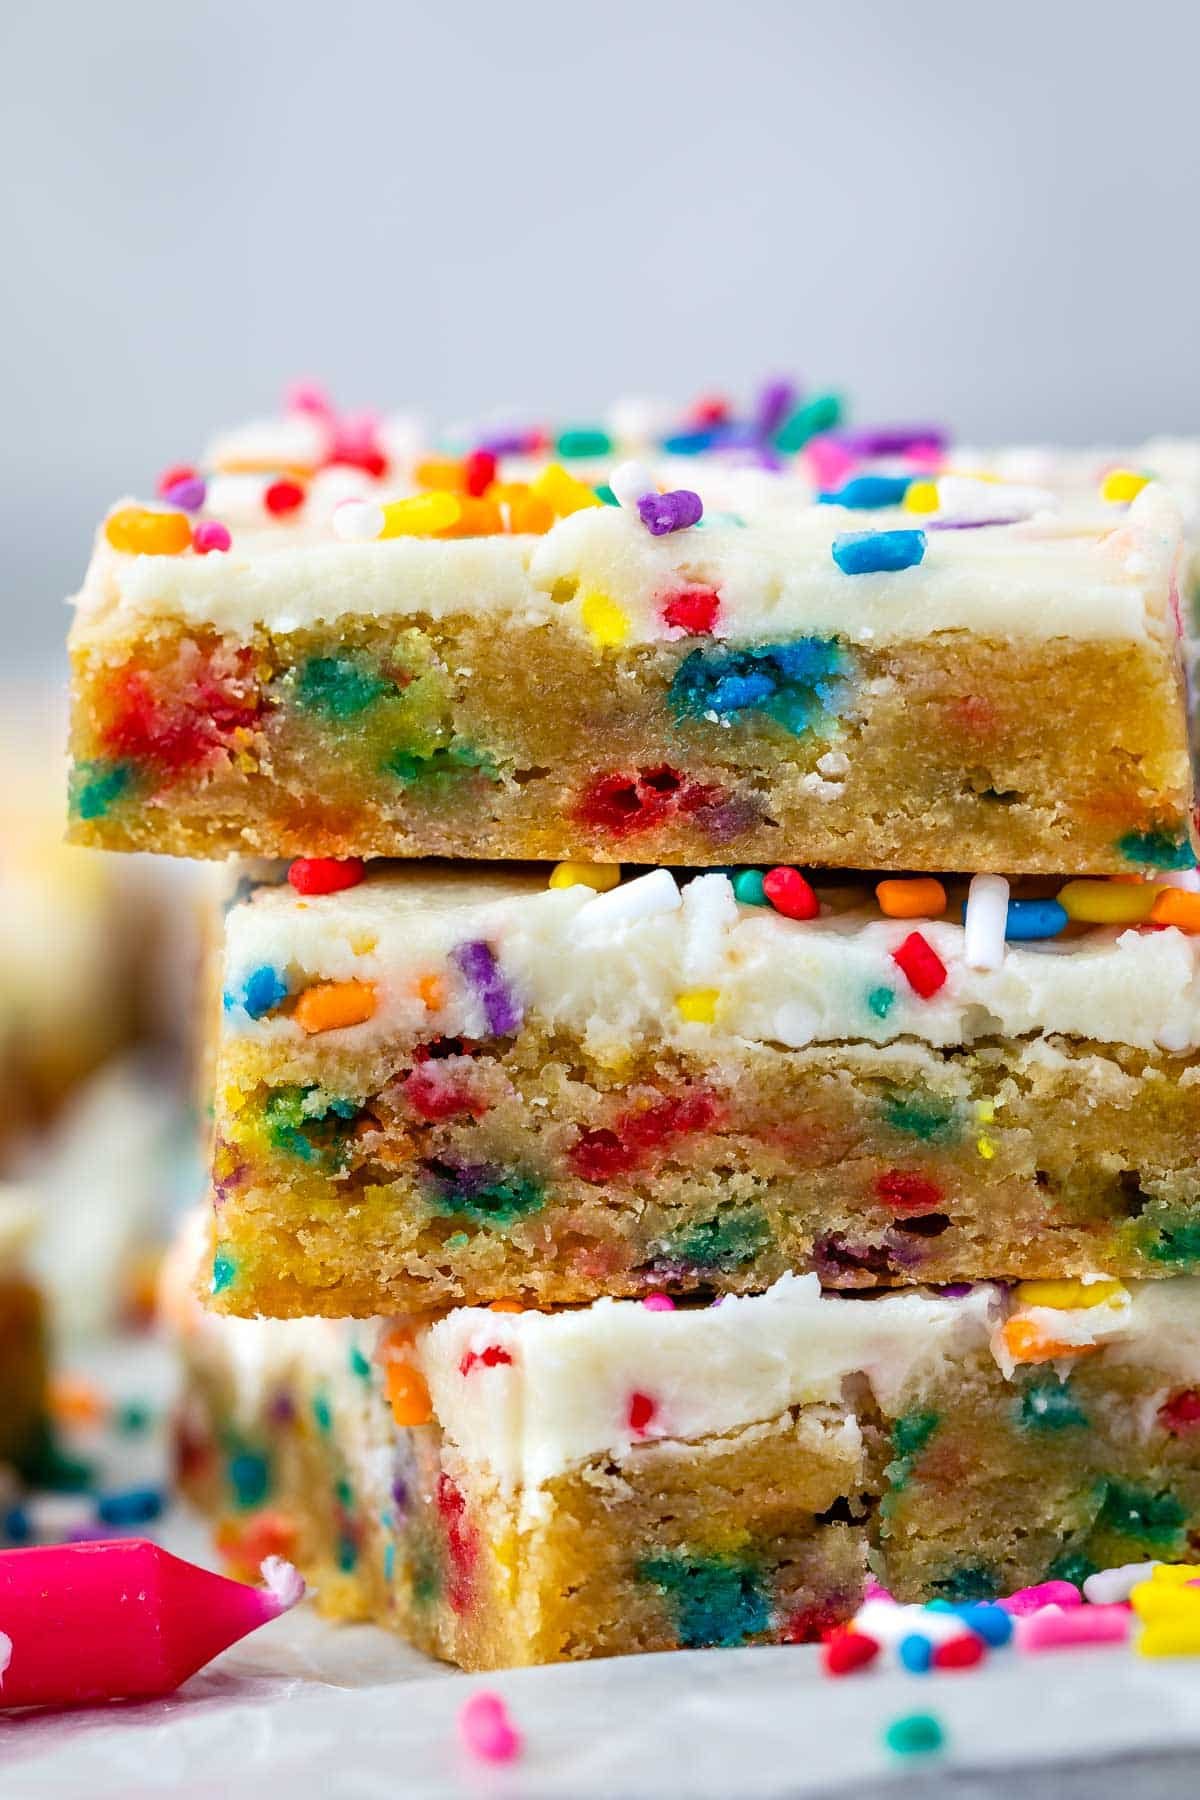 stacked cookie bars with colorful rainbow sprinkles baked in and sprinkled on top